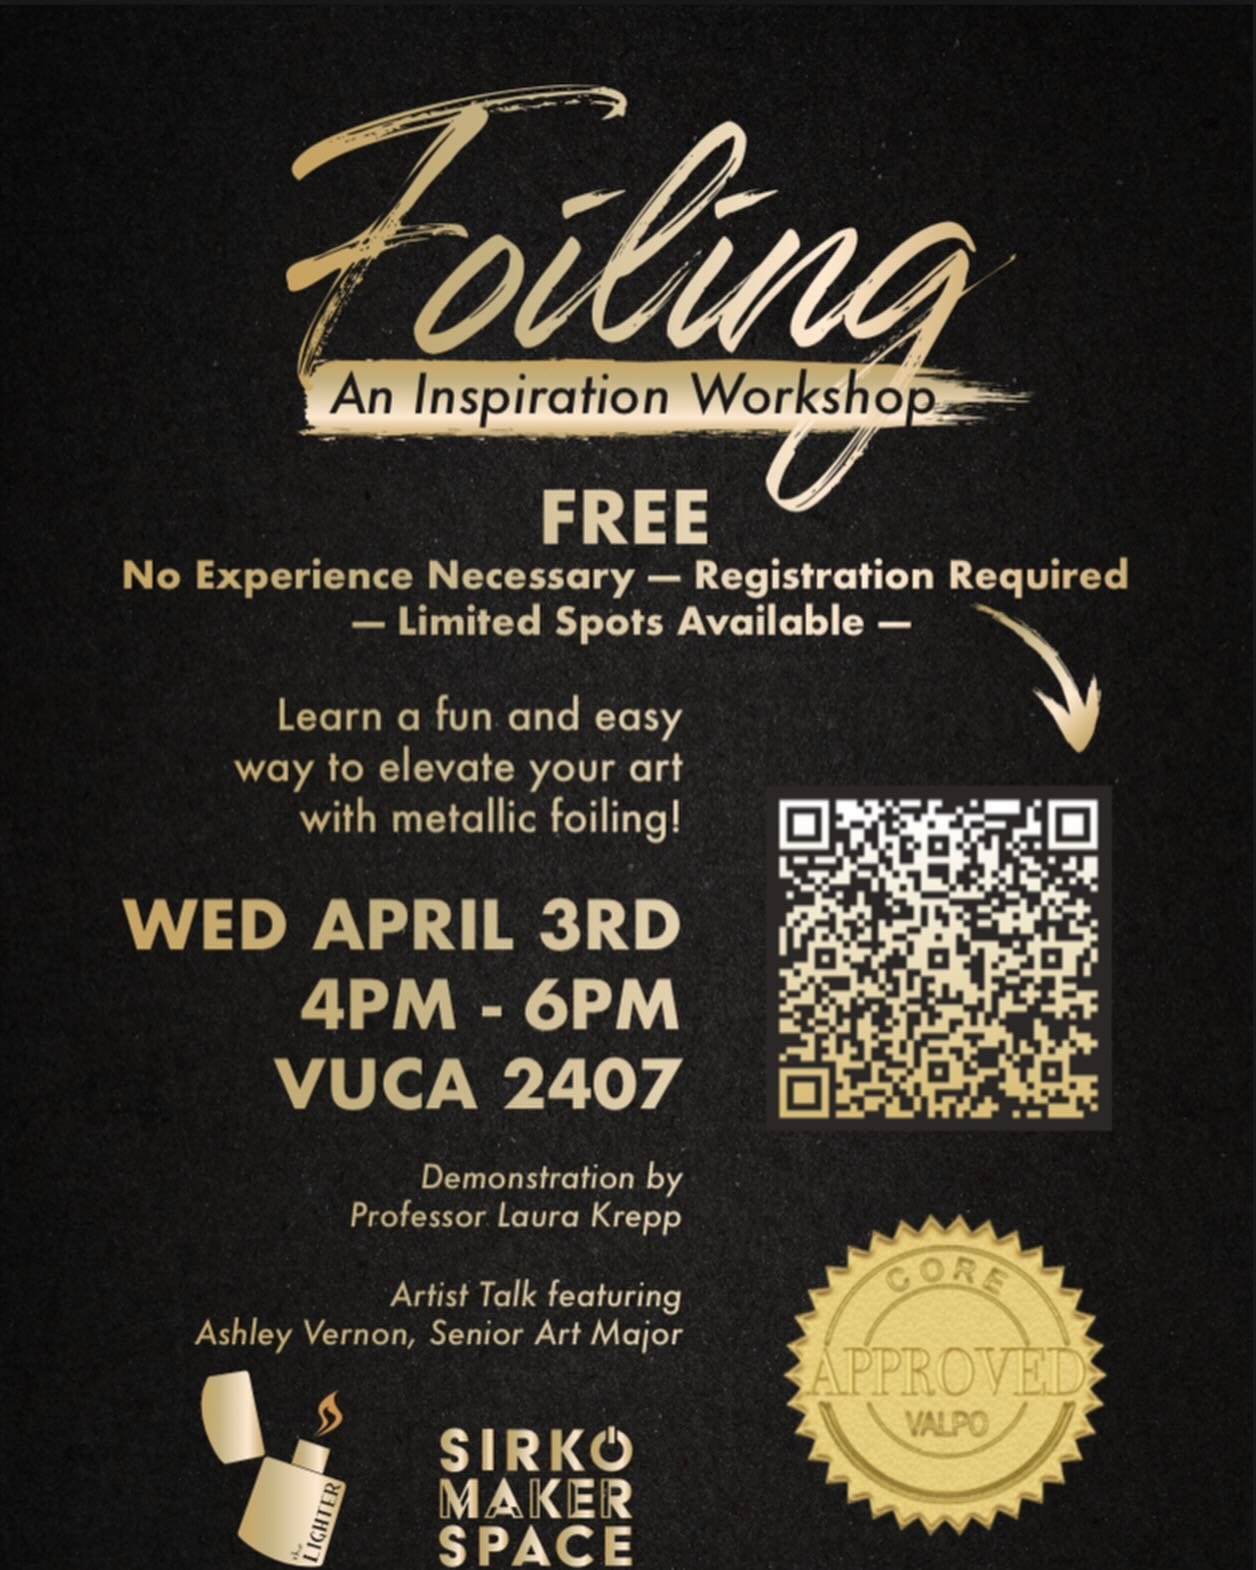 Join us on Wednesday April 3rd for a collaborative inspiration workshop with the Sirko Maker Space! Learn how to enhance a work through the use of foiling in a demonstration by @valpocva Professor Laura Krepp. Then see the skill in action with an art